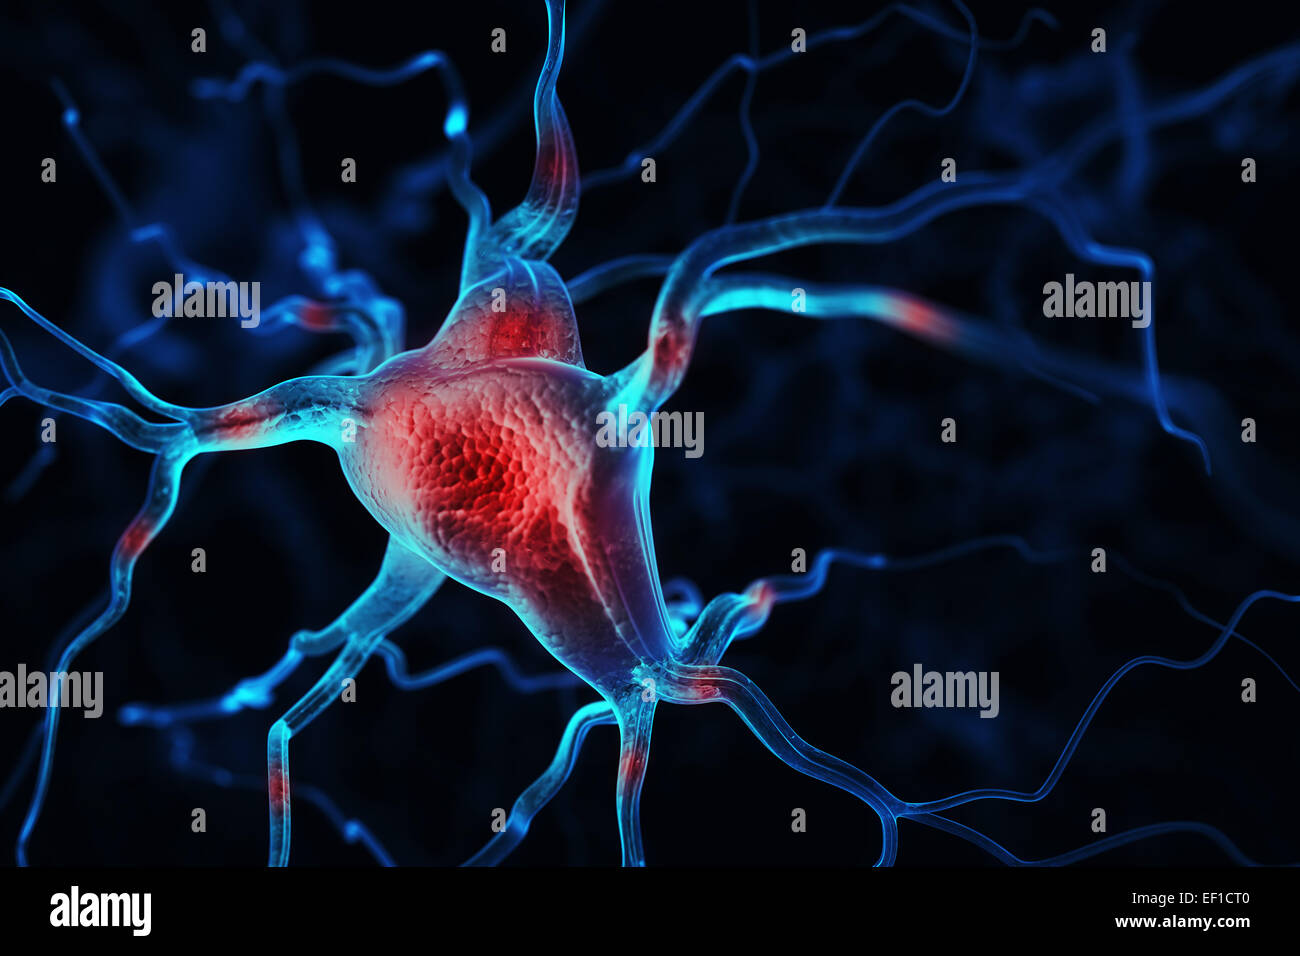 Neurons abstract background Stock Photo